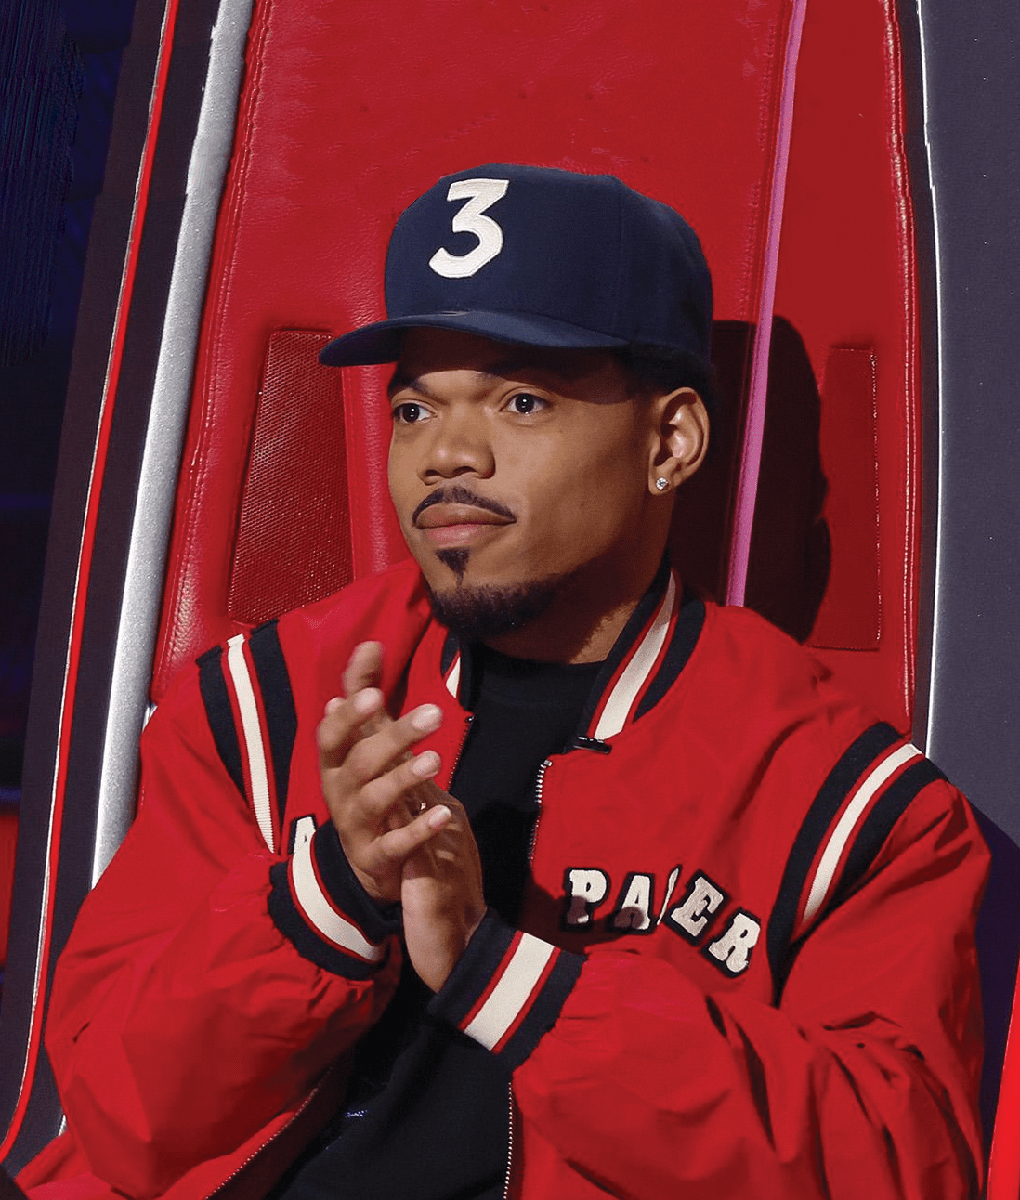 The Voice Chance the Rapper Daily Paper Jacket